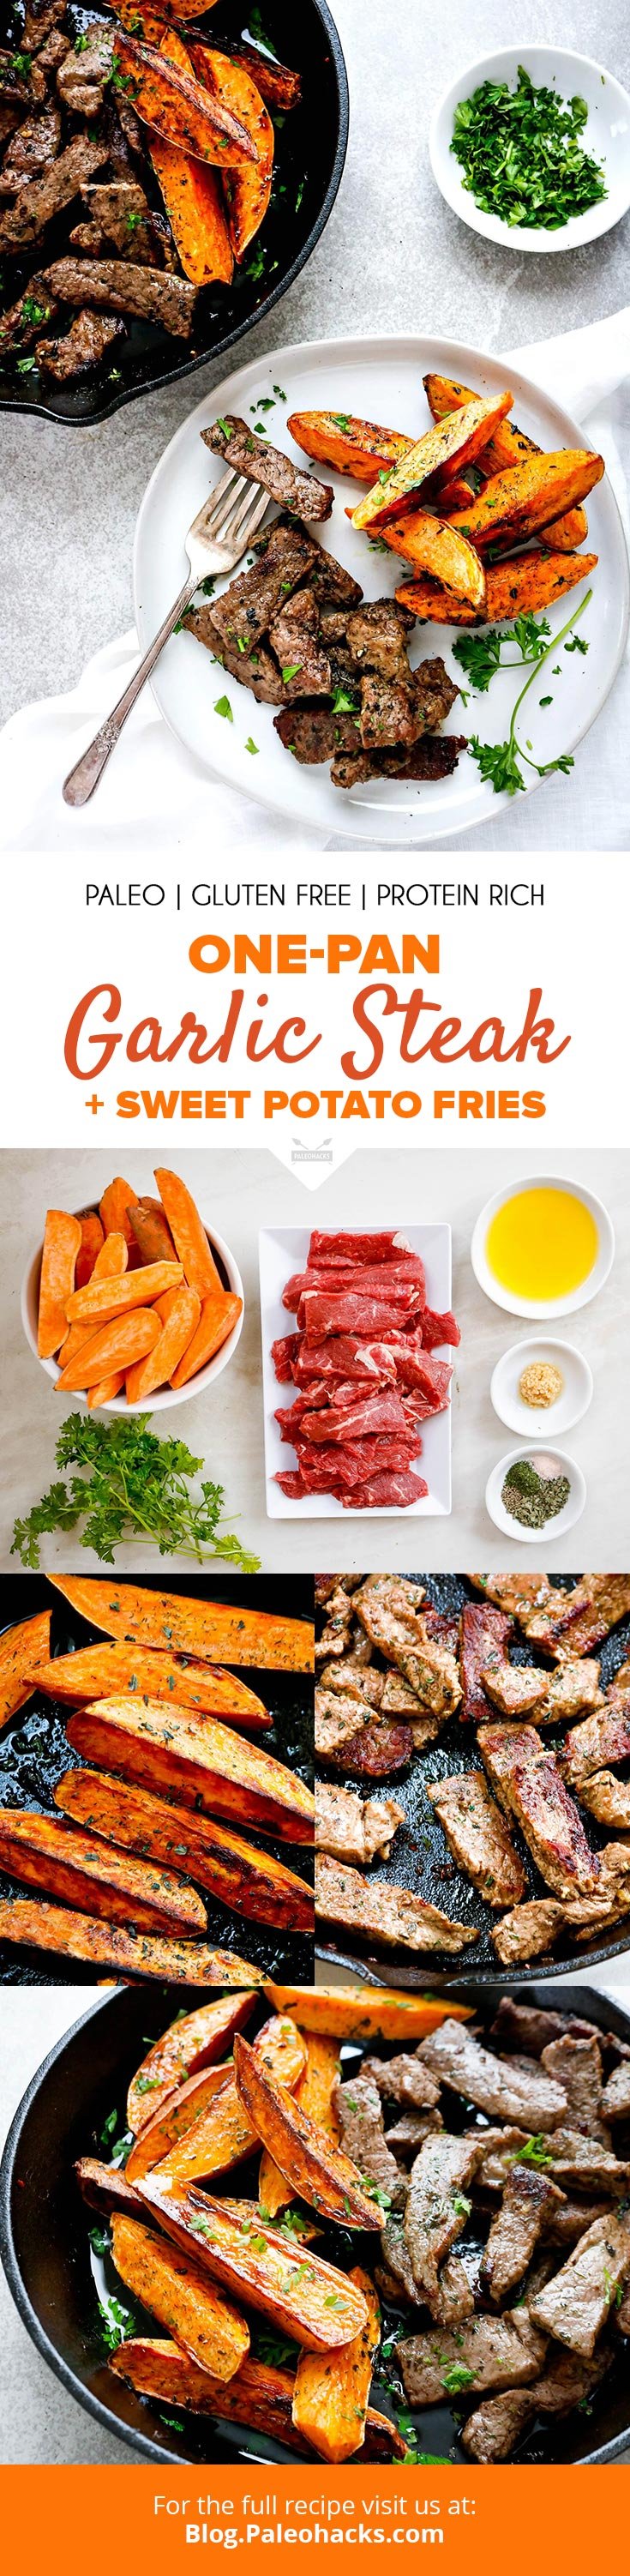 Make dinner a breeze with this one-pan Steak and Sweet Potato Fries smothered in buttery ghee and herbs. Simple, healthy, and easy to cleanup. Count us in!